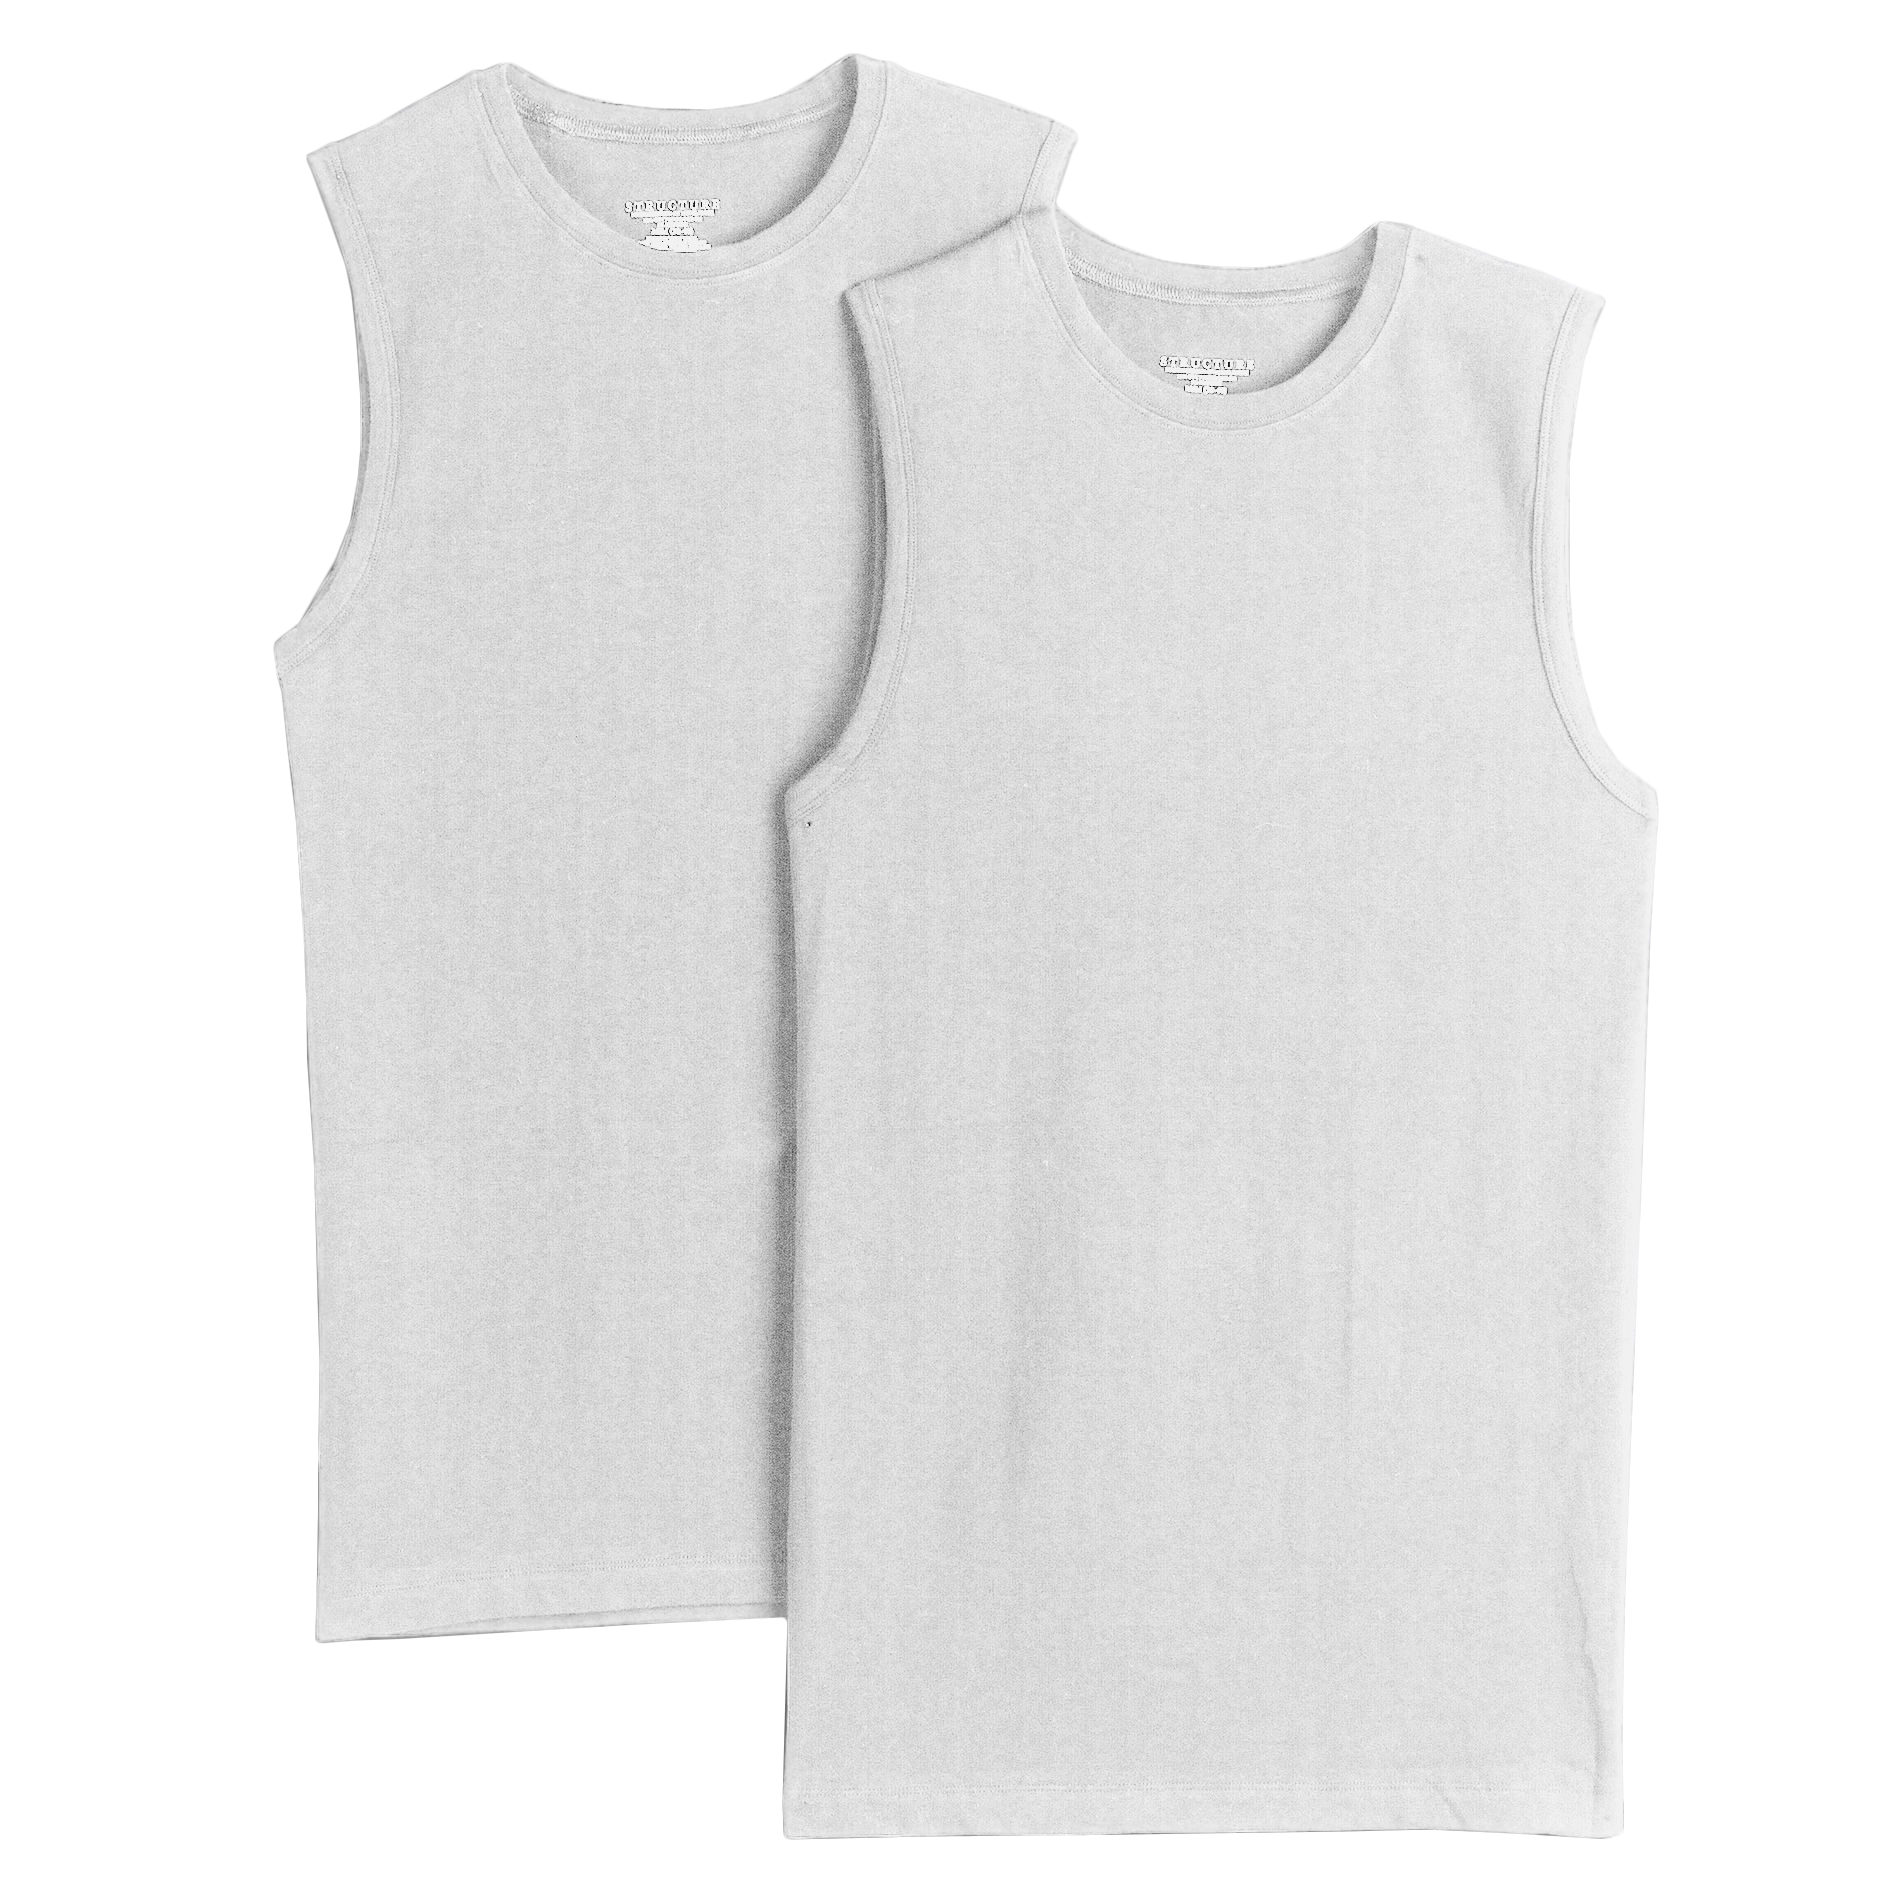 Structure 2-Pack of Muscle Stretch Tees